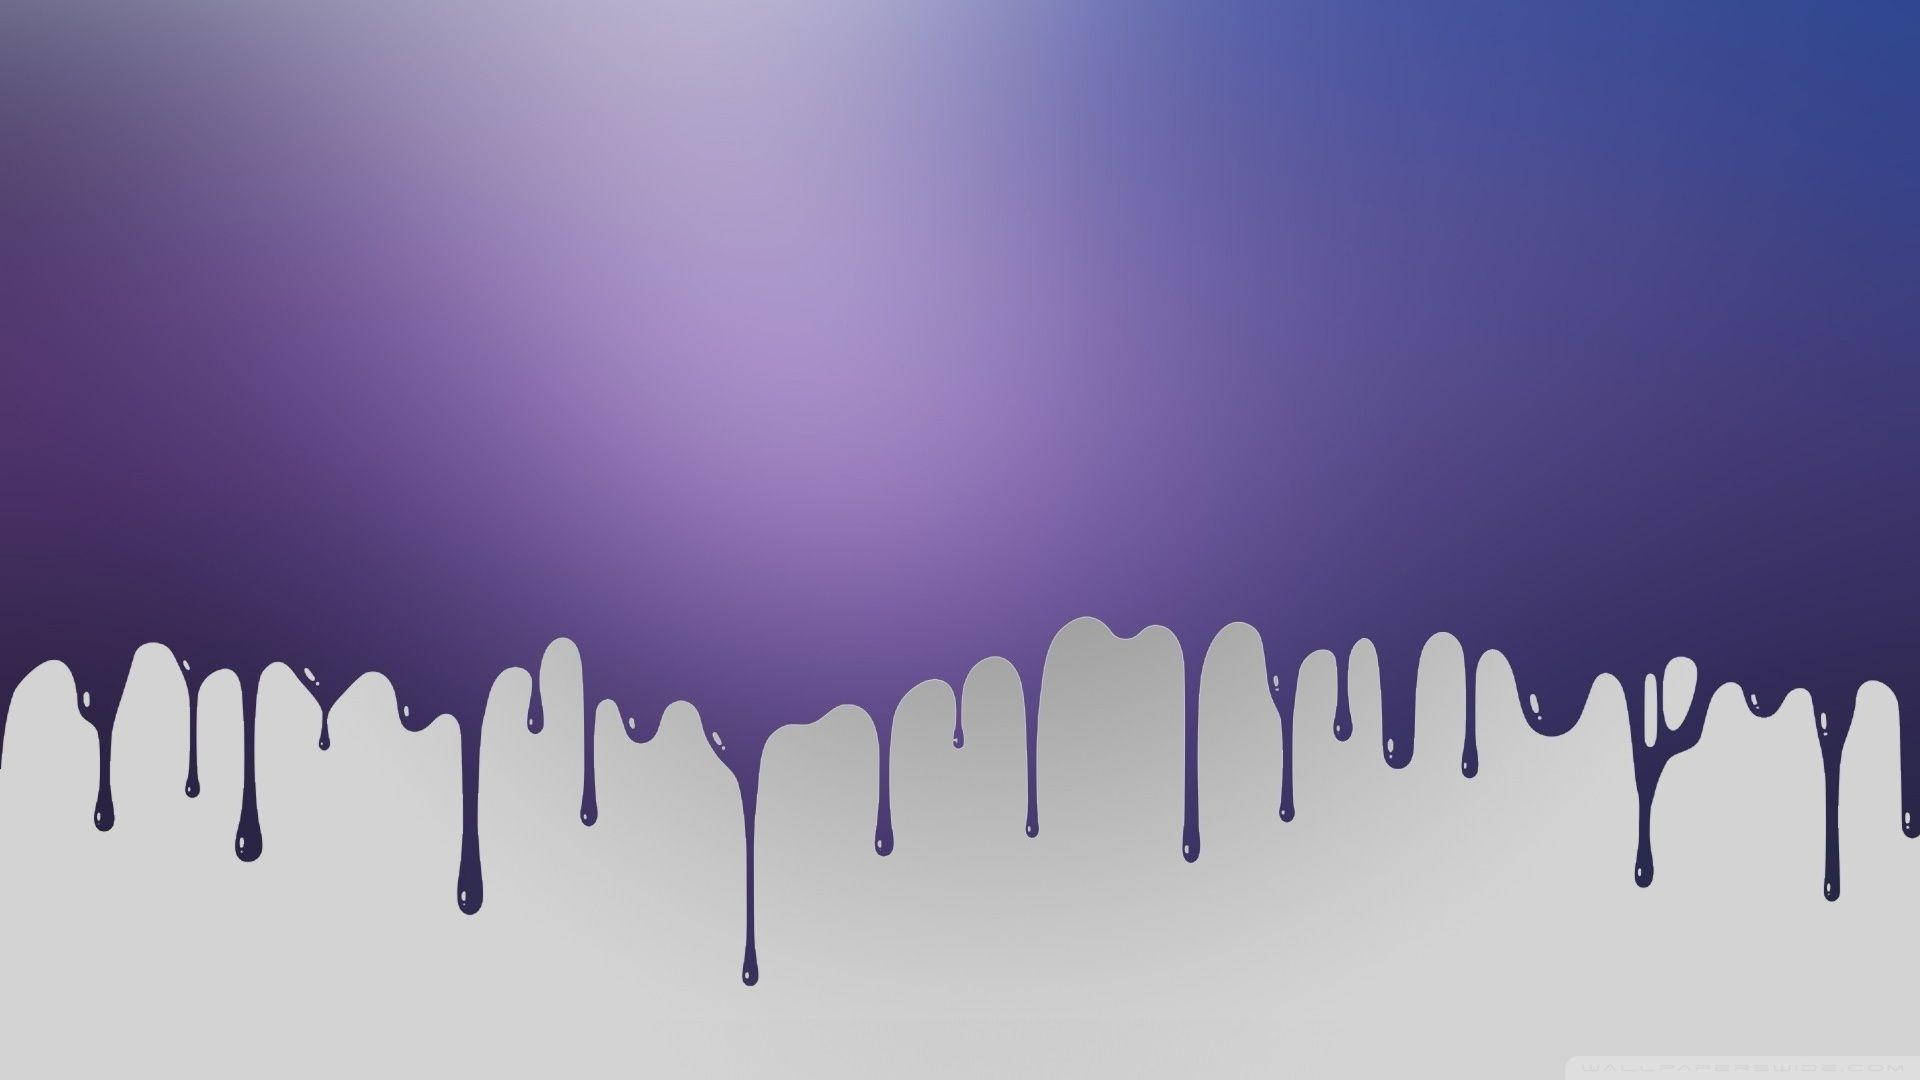 Drippy 1920X1080 Wallpaper and Background Image